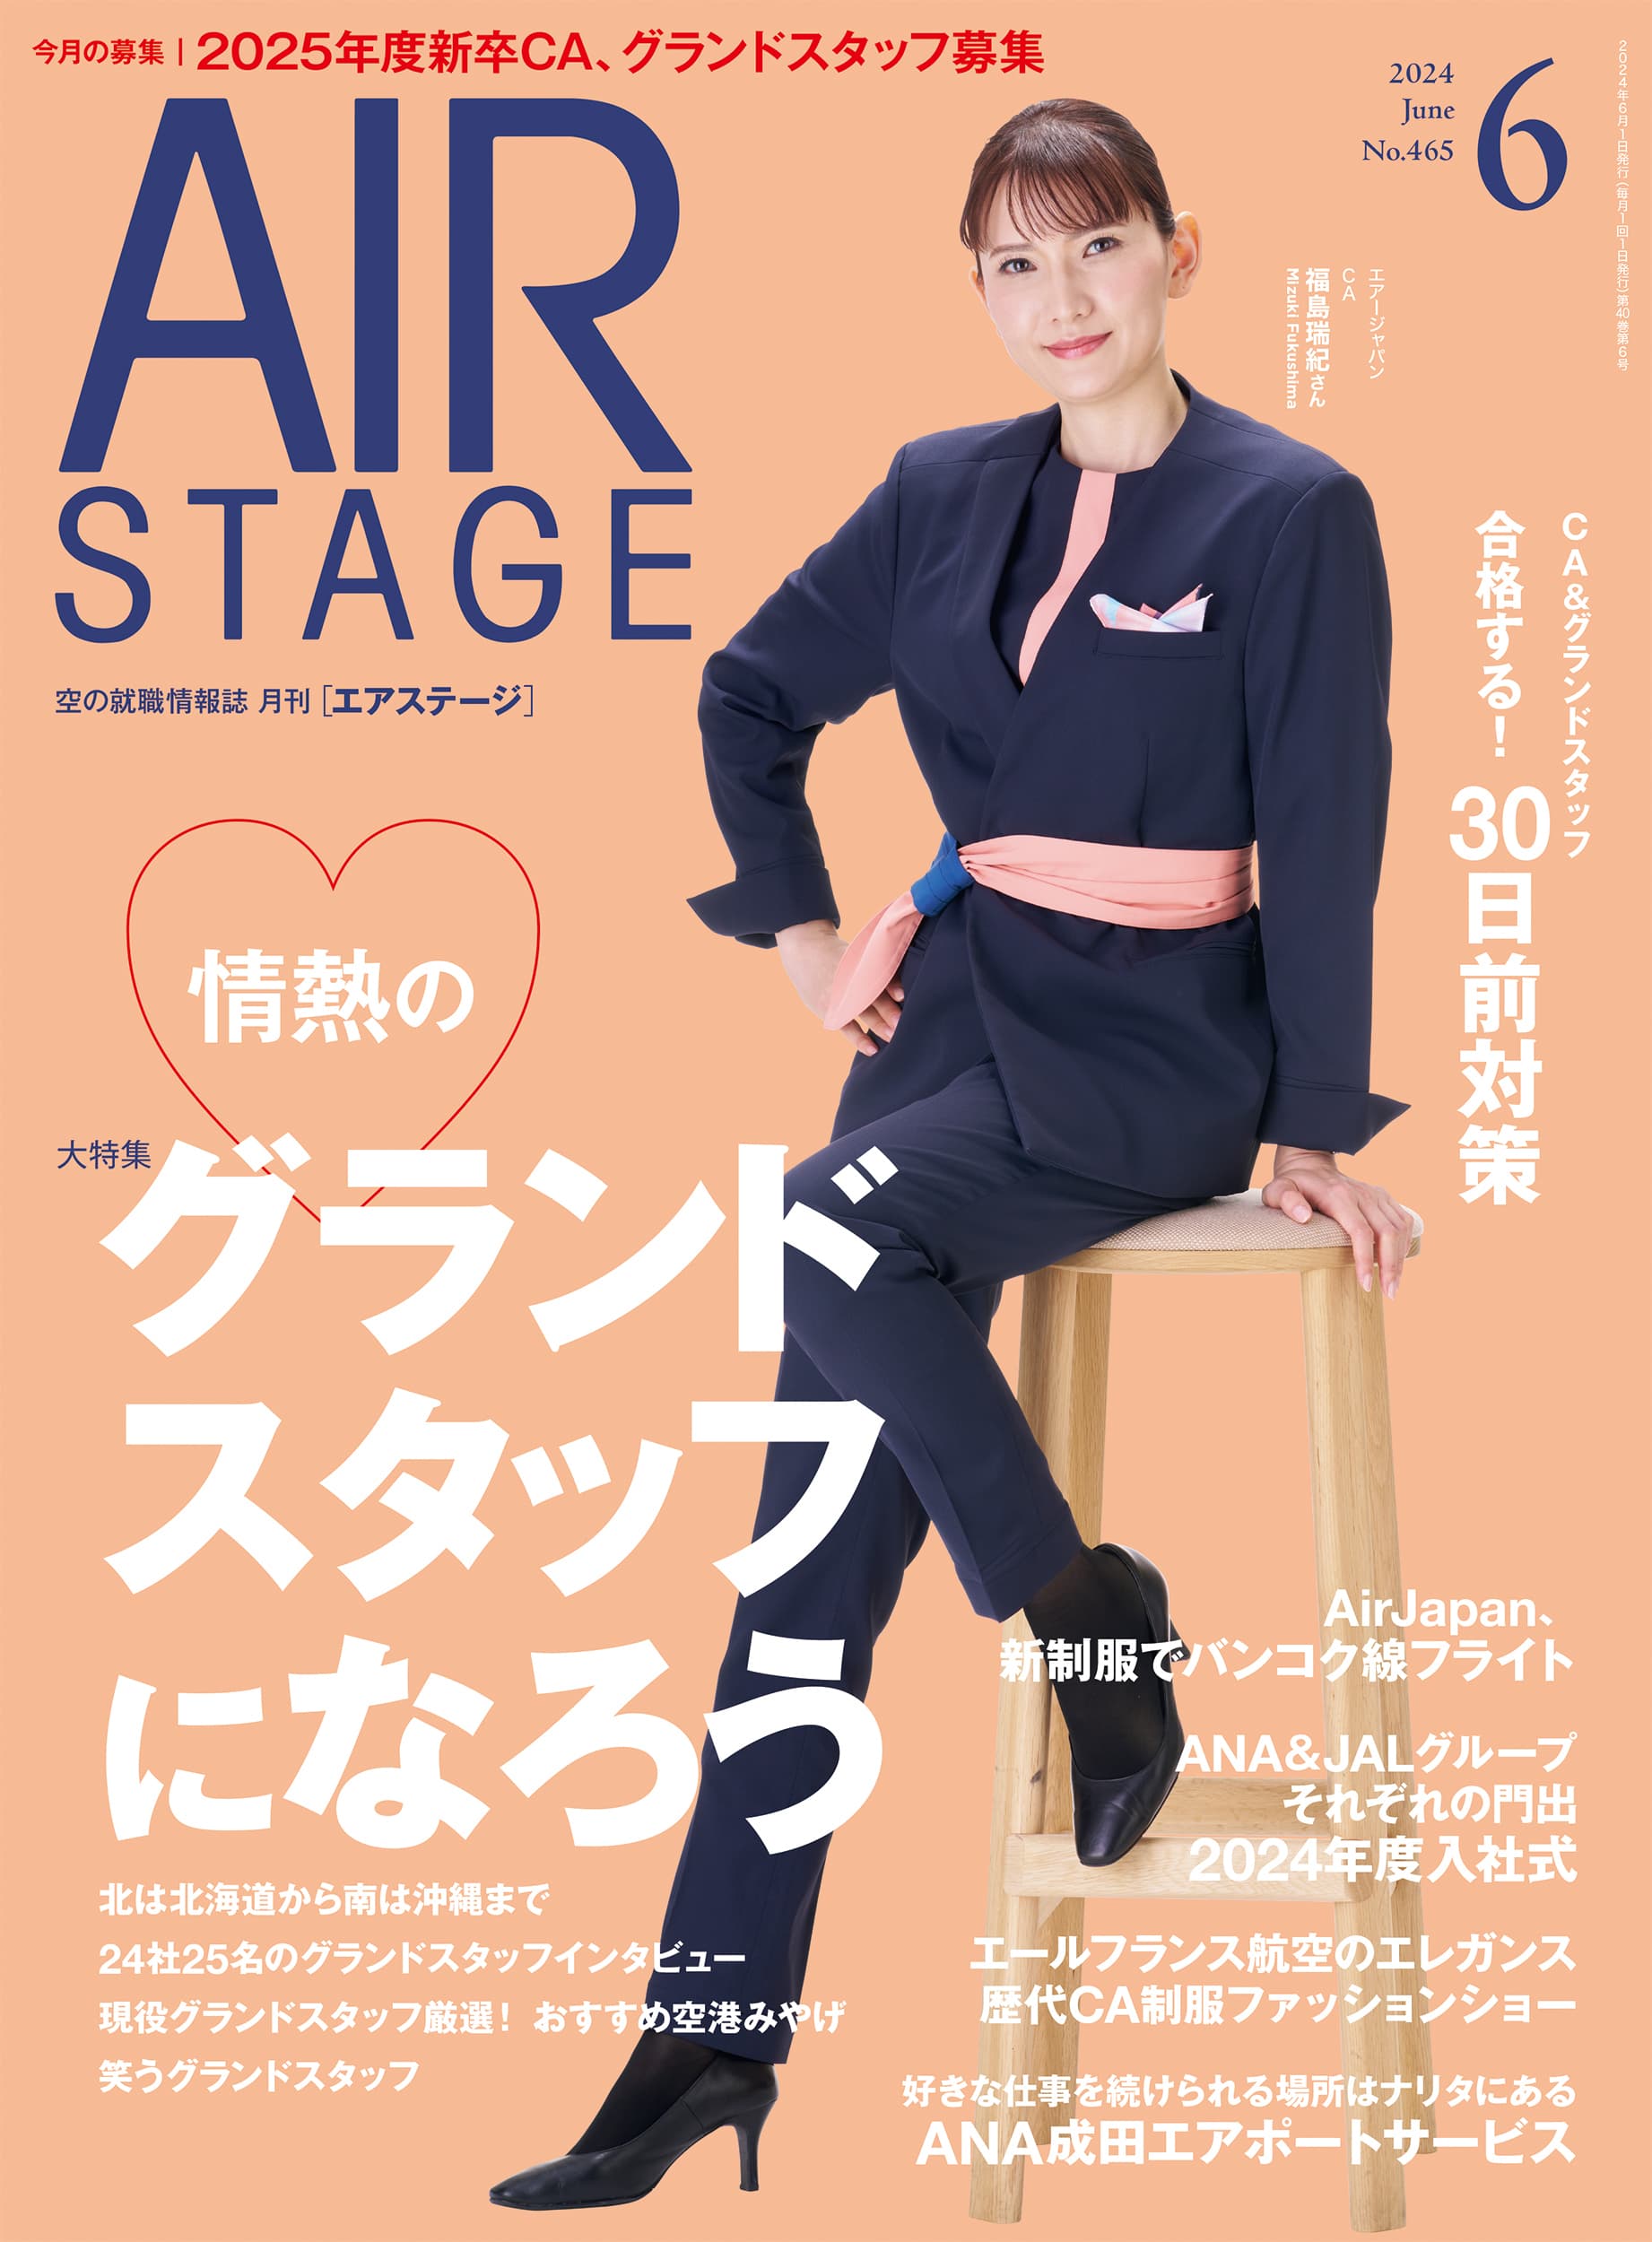 AS2406cover